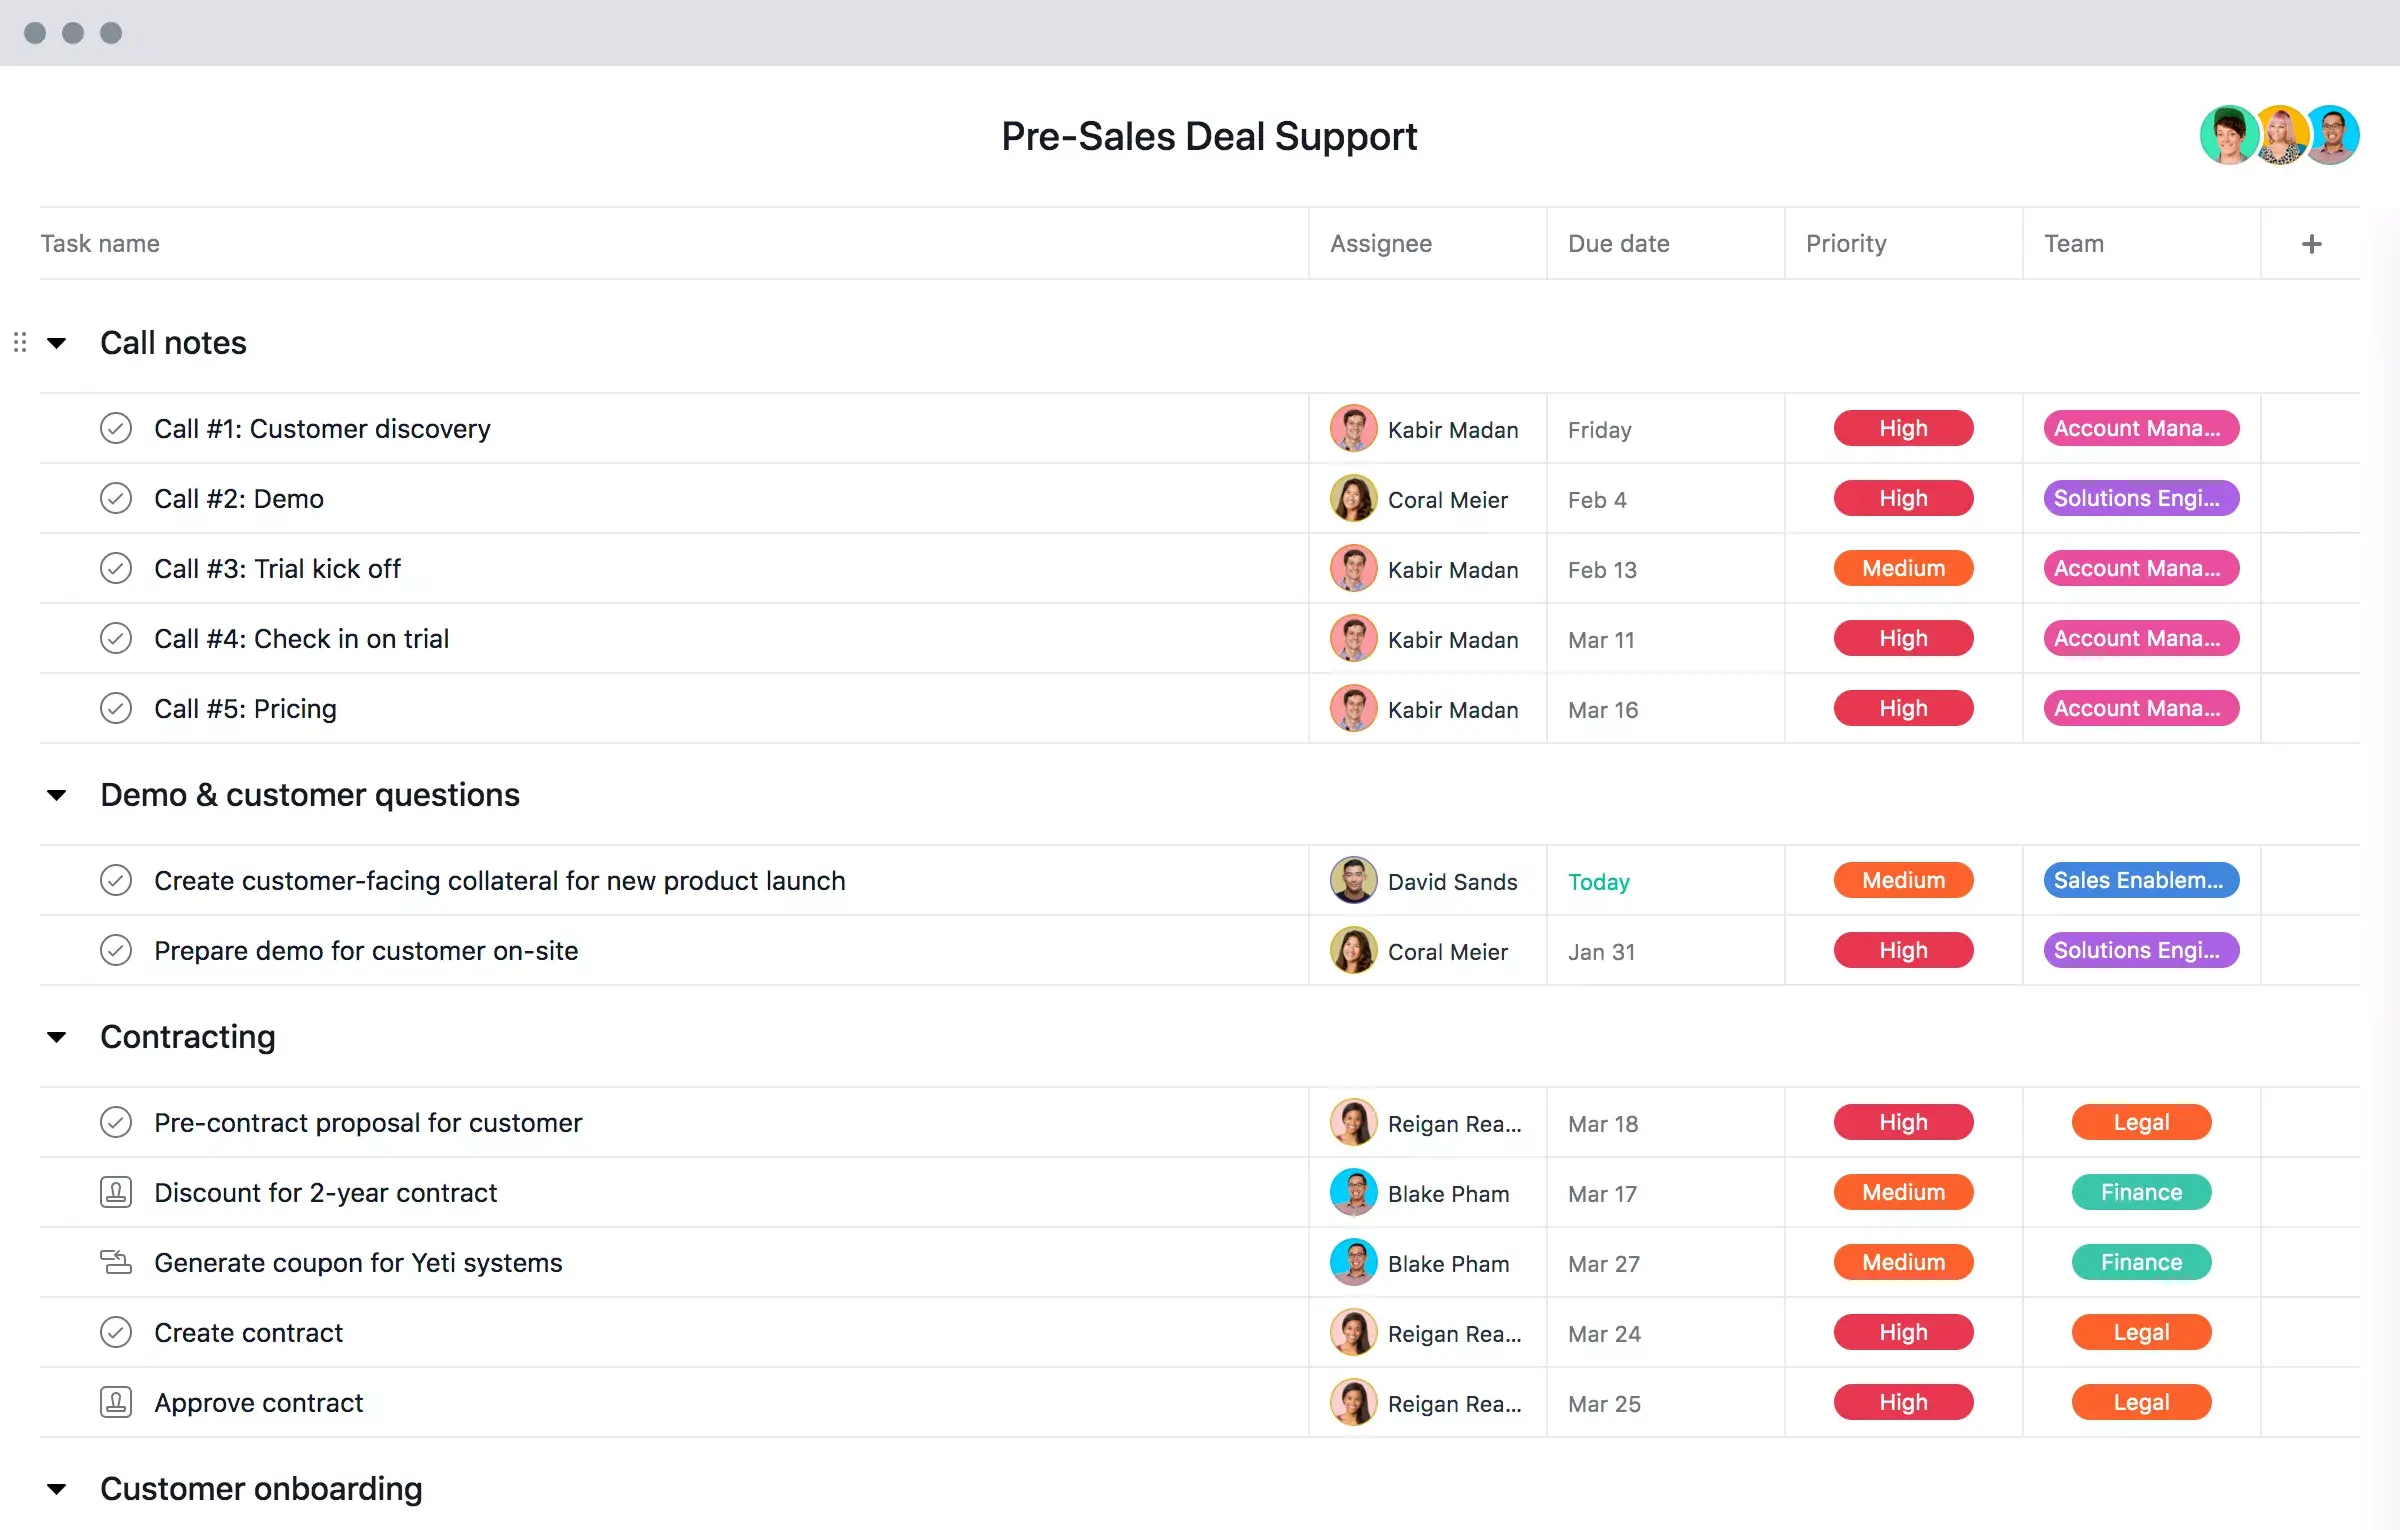 [Old product ui] Pre-sales deal support template in Asana, spreadsheet-style project view (List)